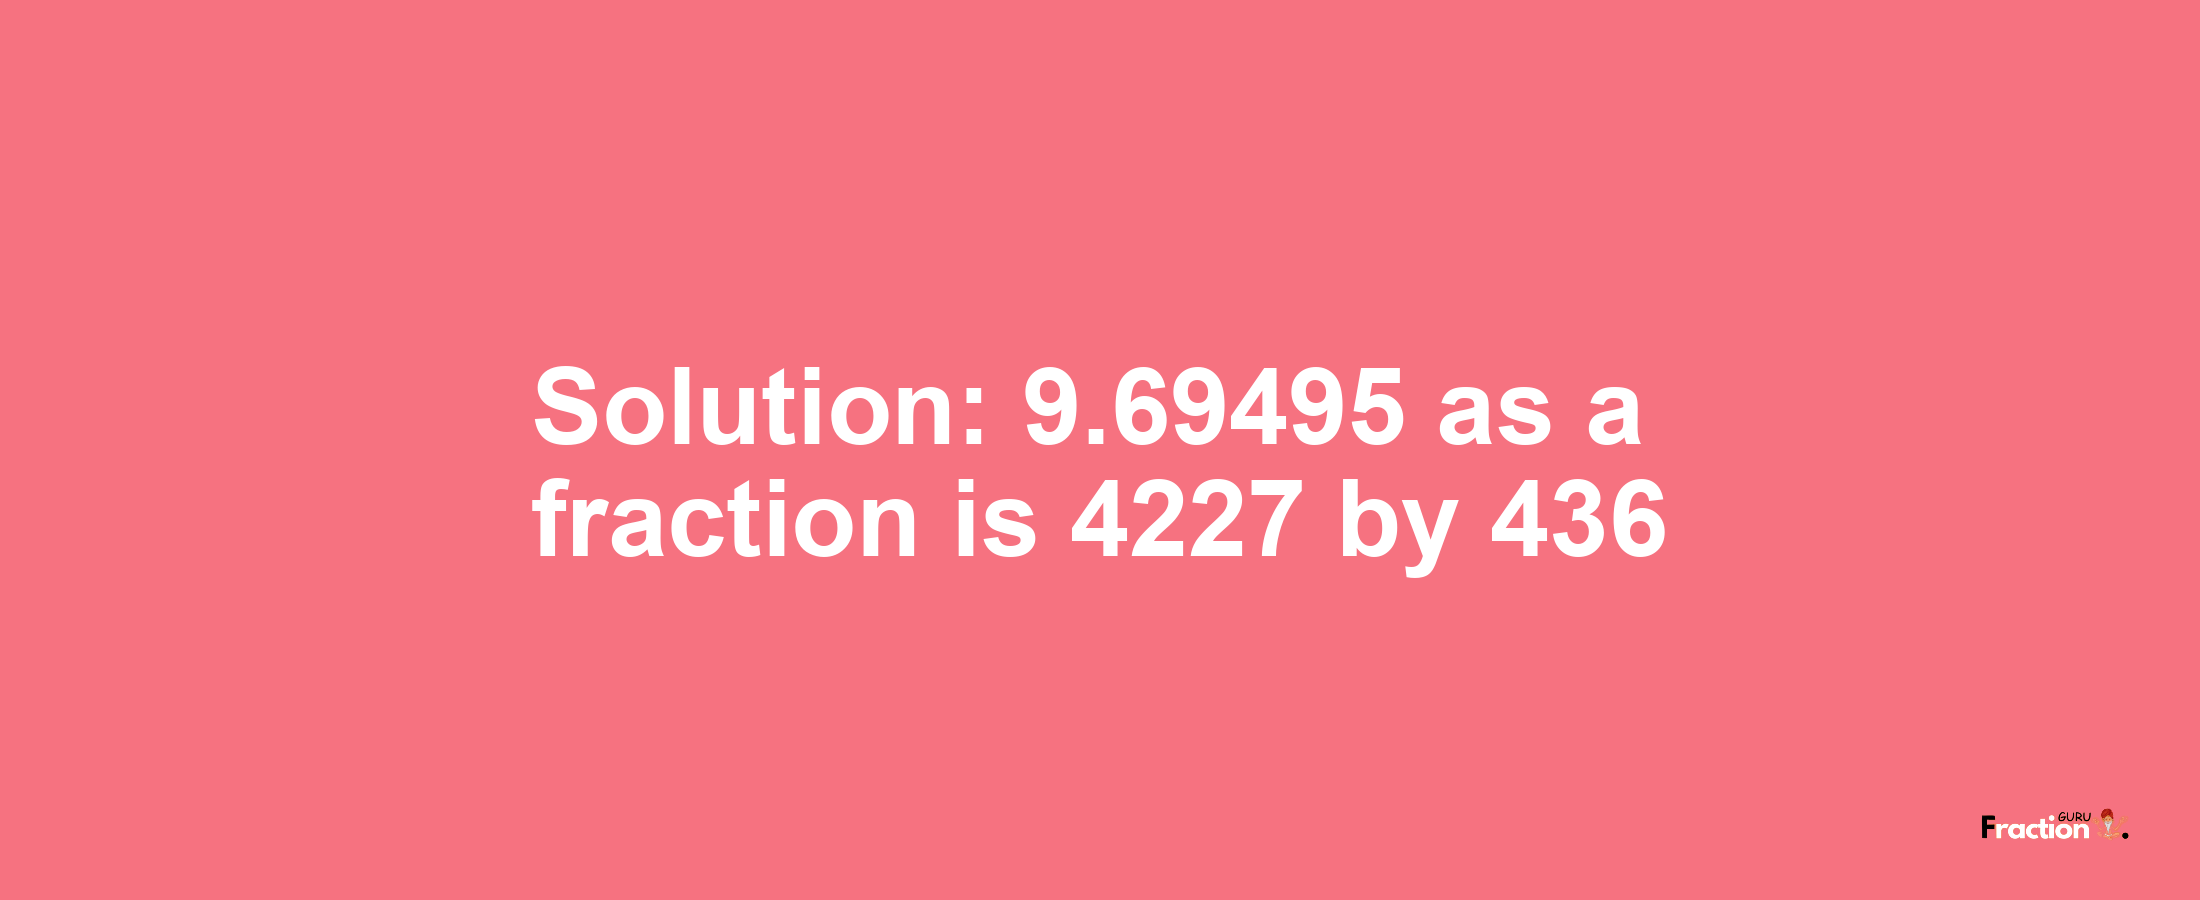 Solution:9.69495 as a fraction is 4227/436